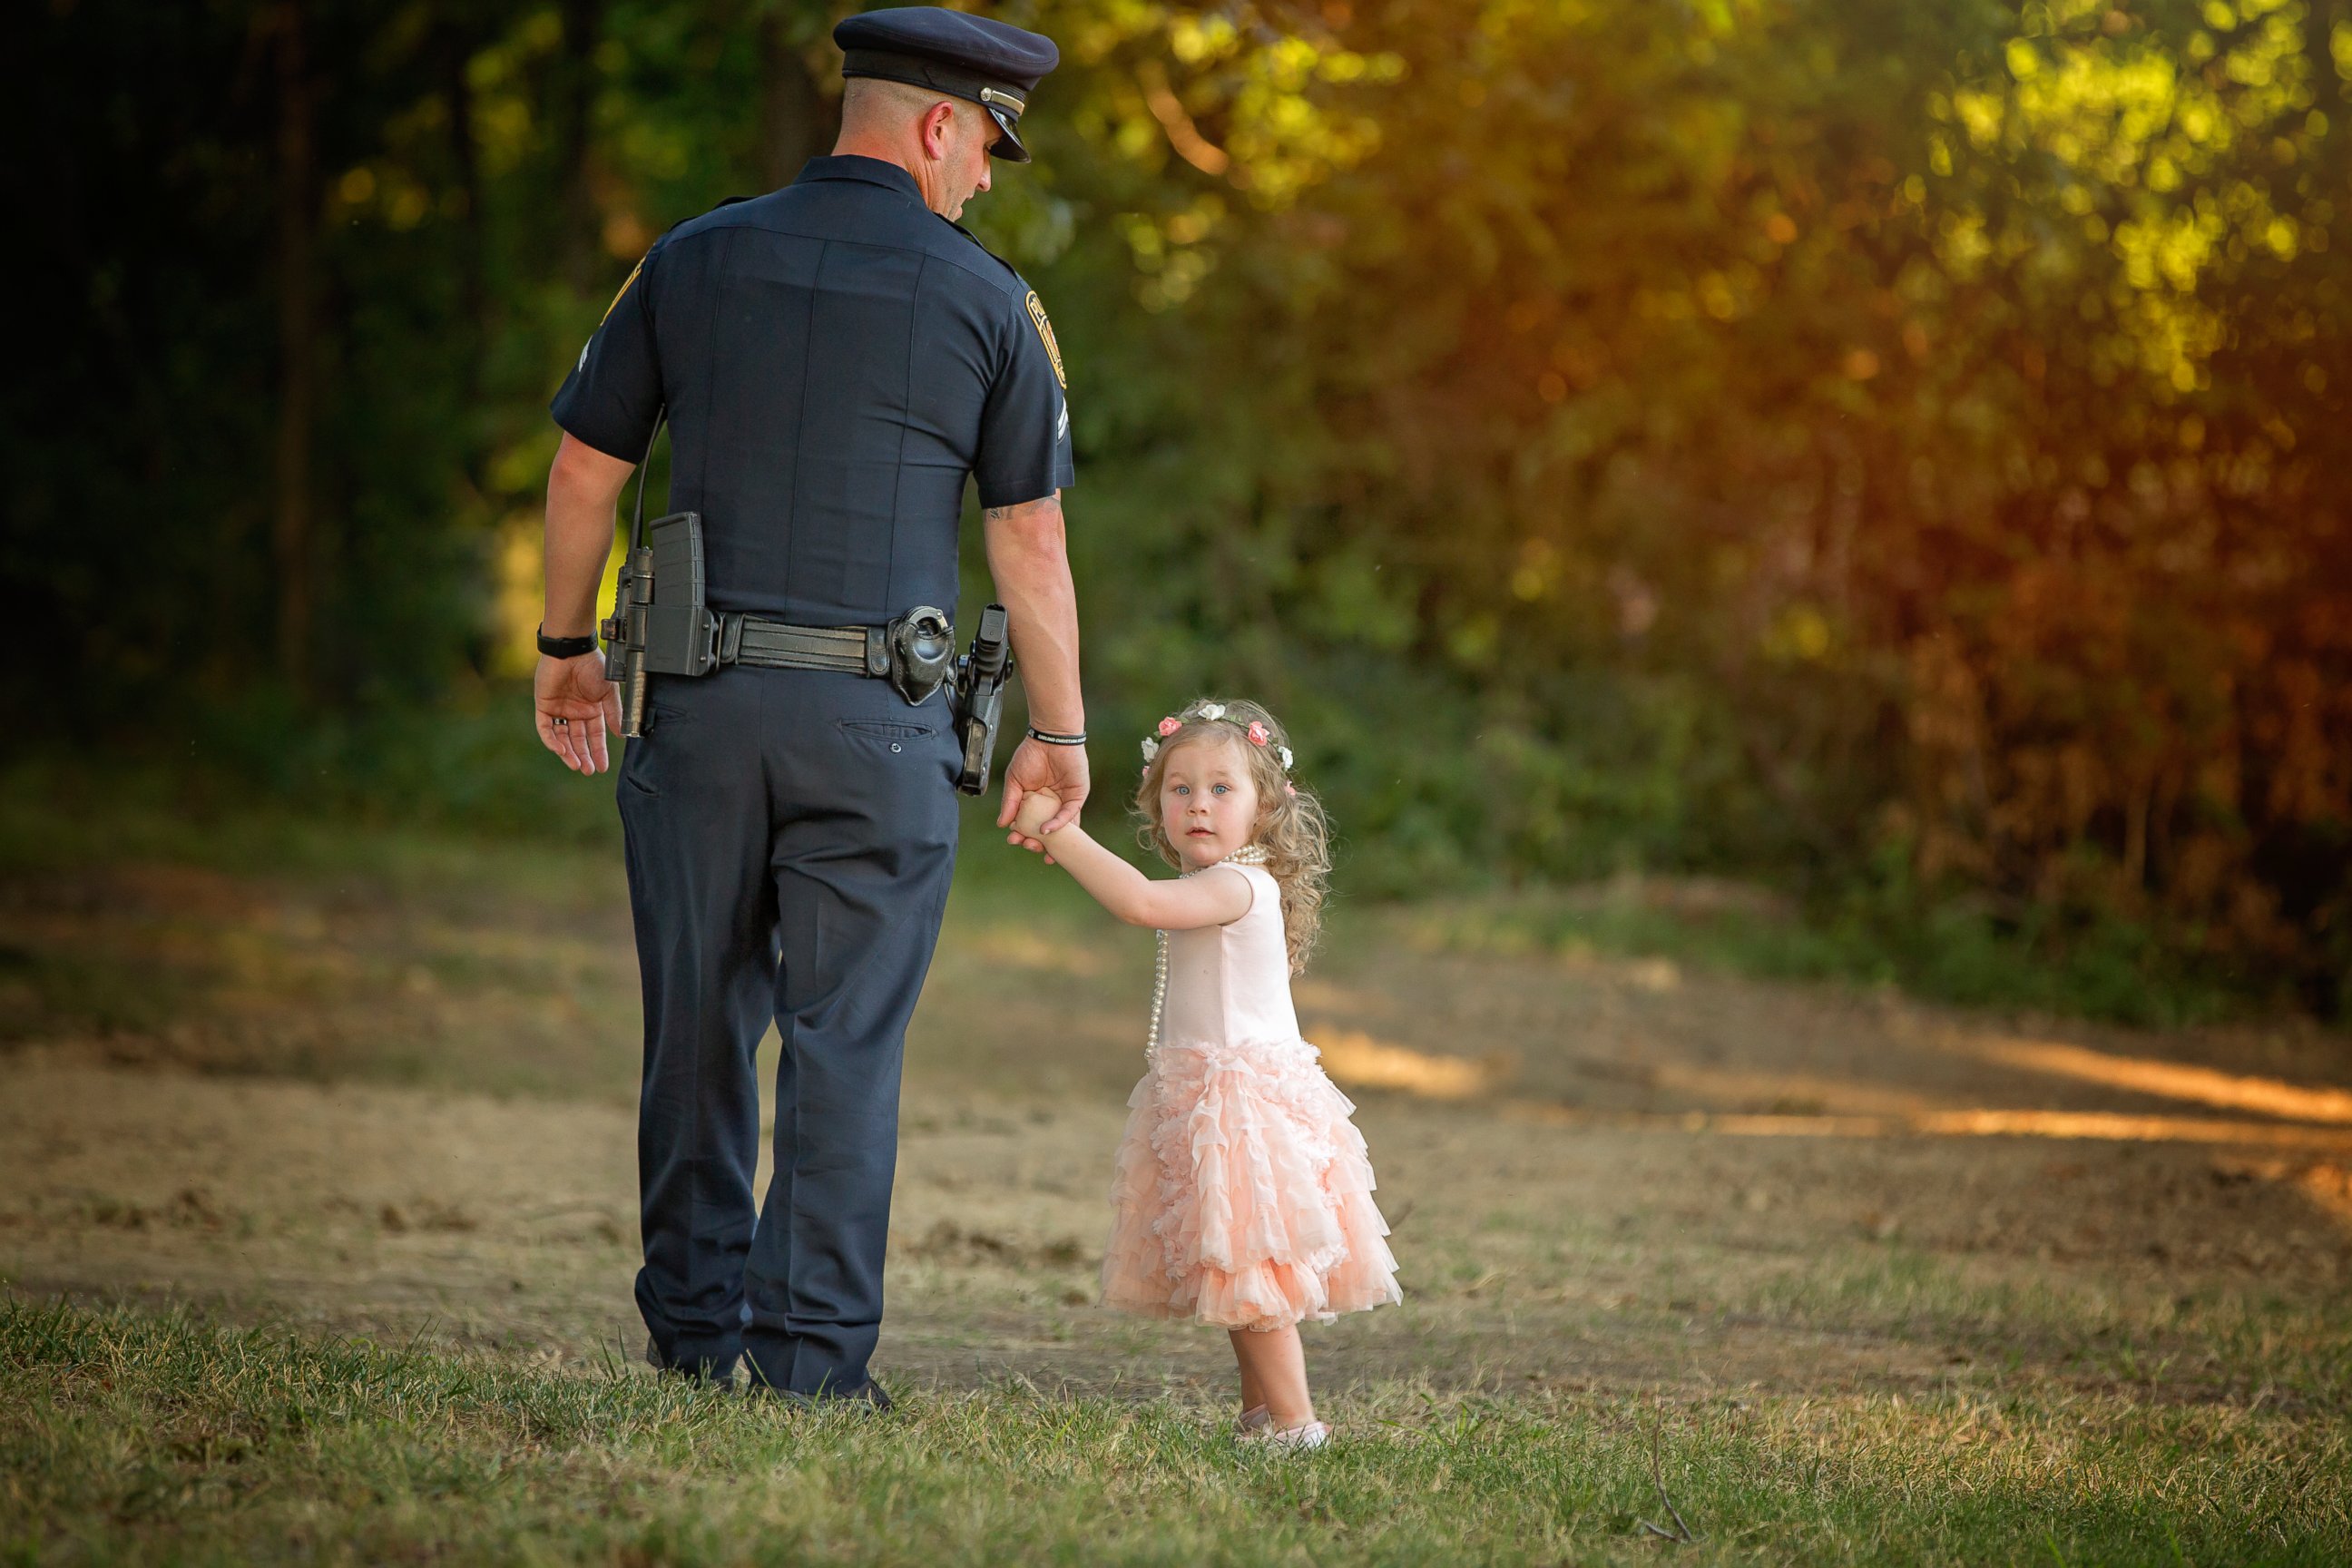 PHOTO: On July 26, 2015, Bexley, 2, the daughter of Tammy Norvell of Rowlett, Texas, was saved by Officer Patrick Ray after being choked on a penny. One year later, the pair had a tea party photo shoot. 